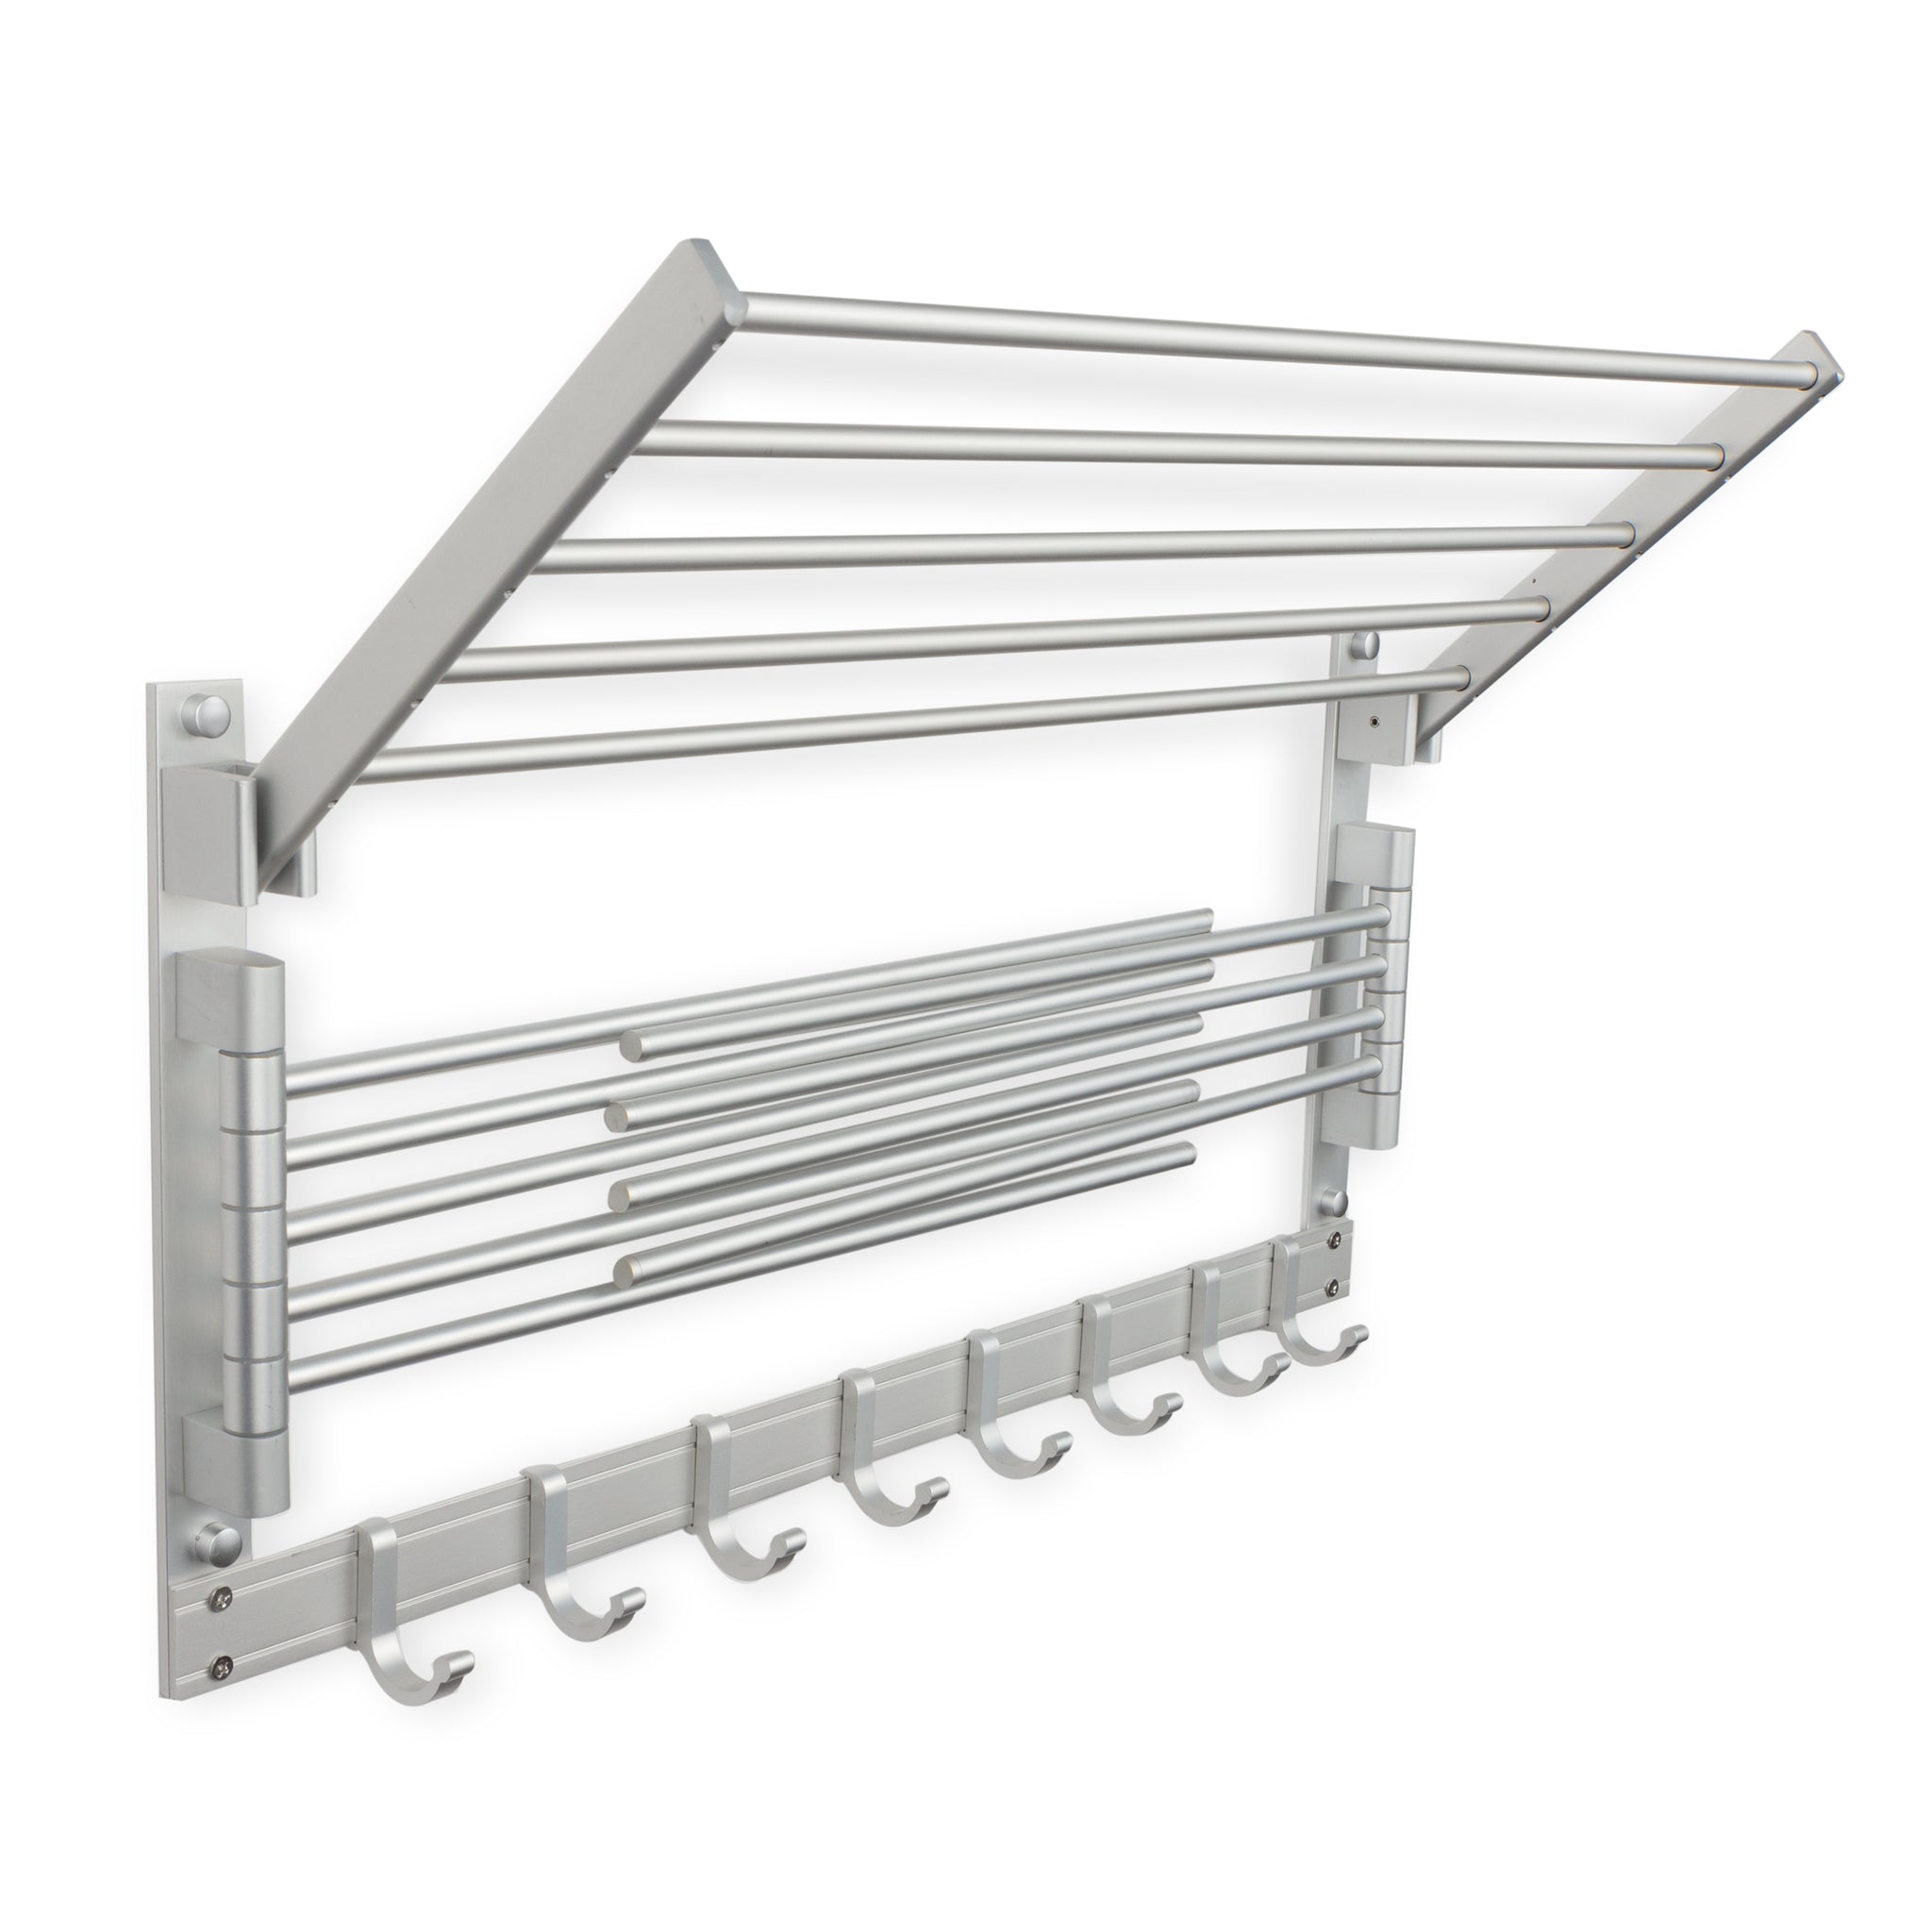 brightmaison Clothes Laundry Drying Racks - 2 Set Rack - Heavy Duty  Stainless Steel Wall Mounted Folding Adjustable